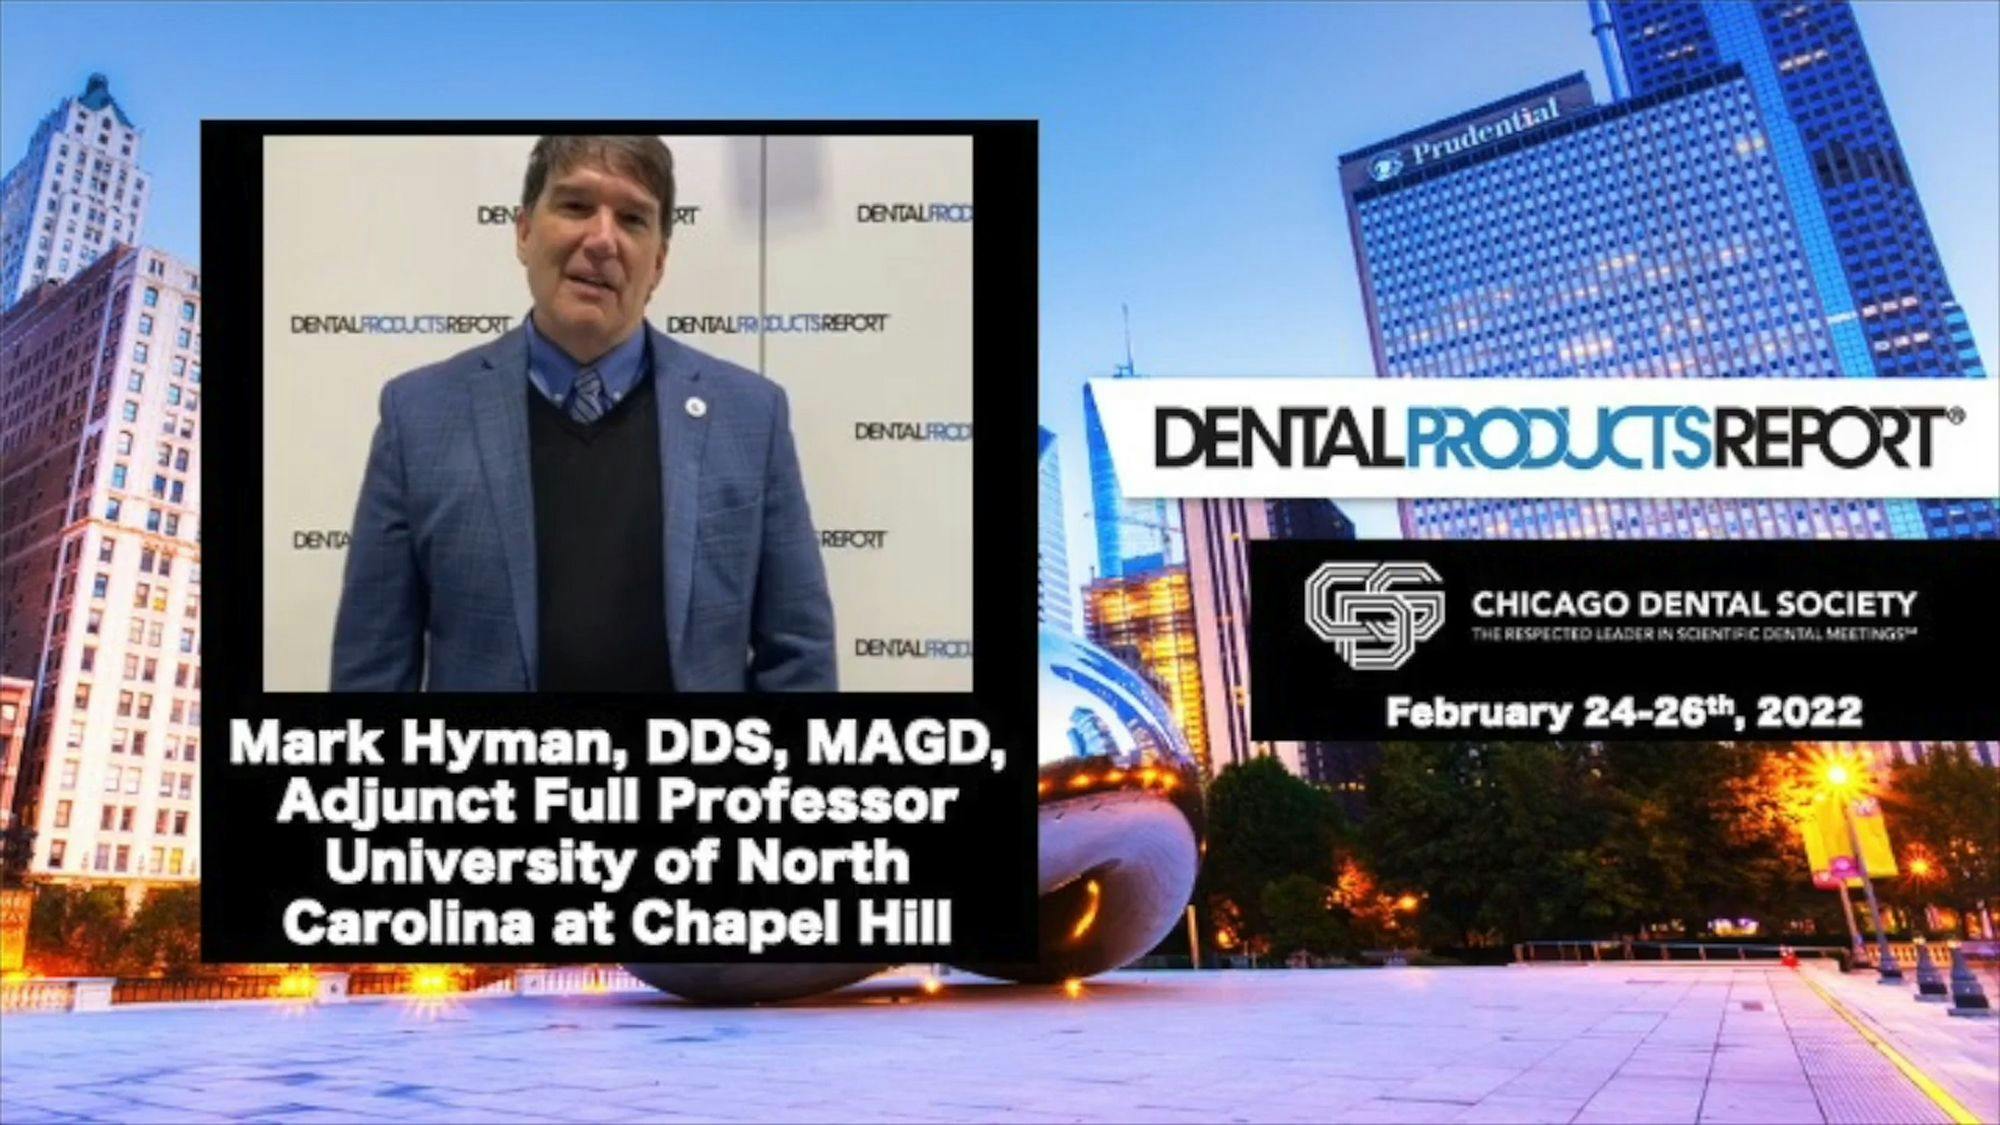 2022 Chicago Dental Society Midwinter Meeting, Interview with Mark Hyman, DDS, MAGD